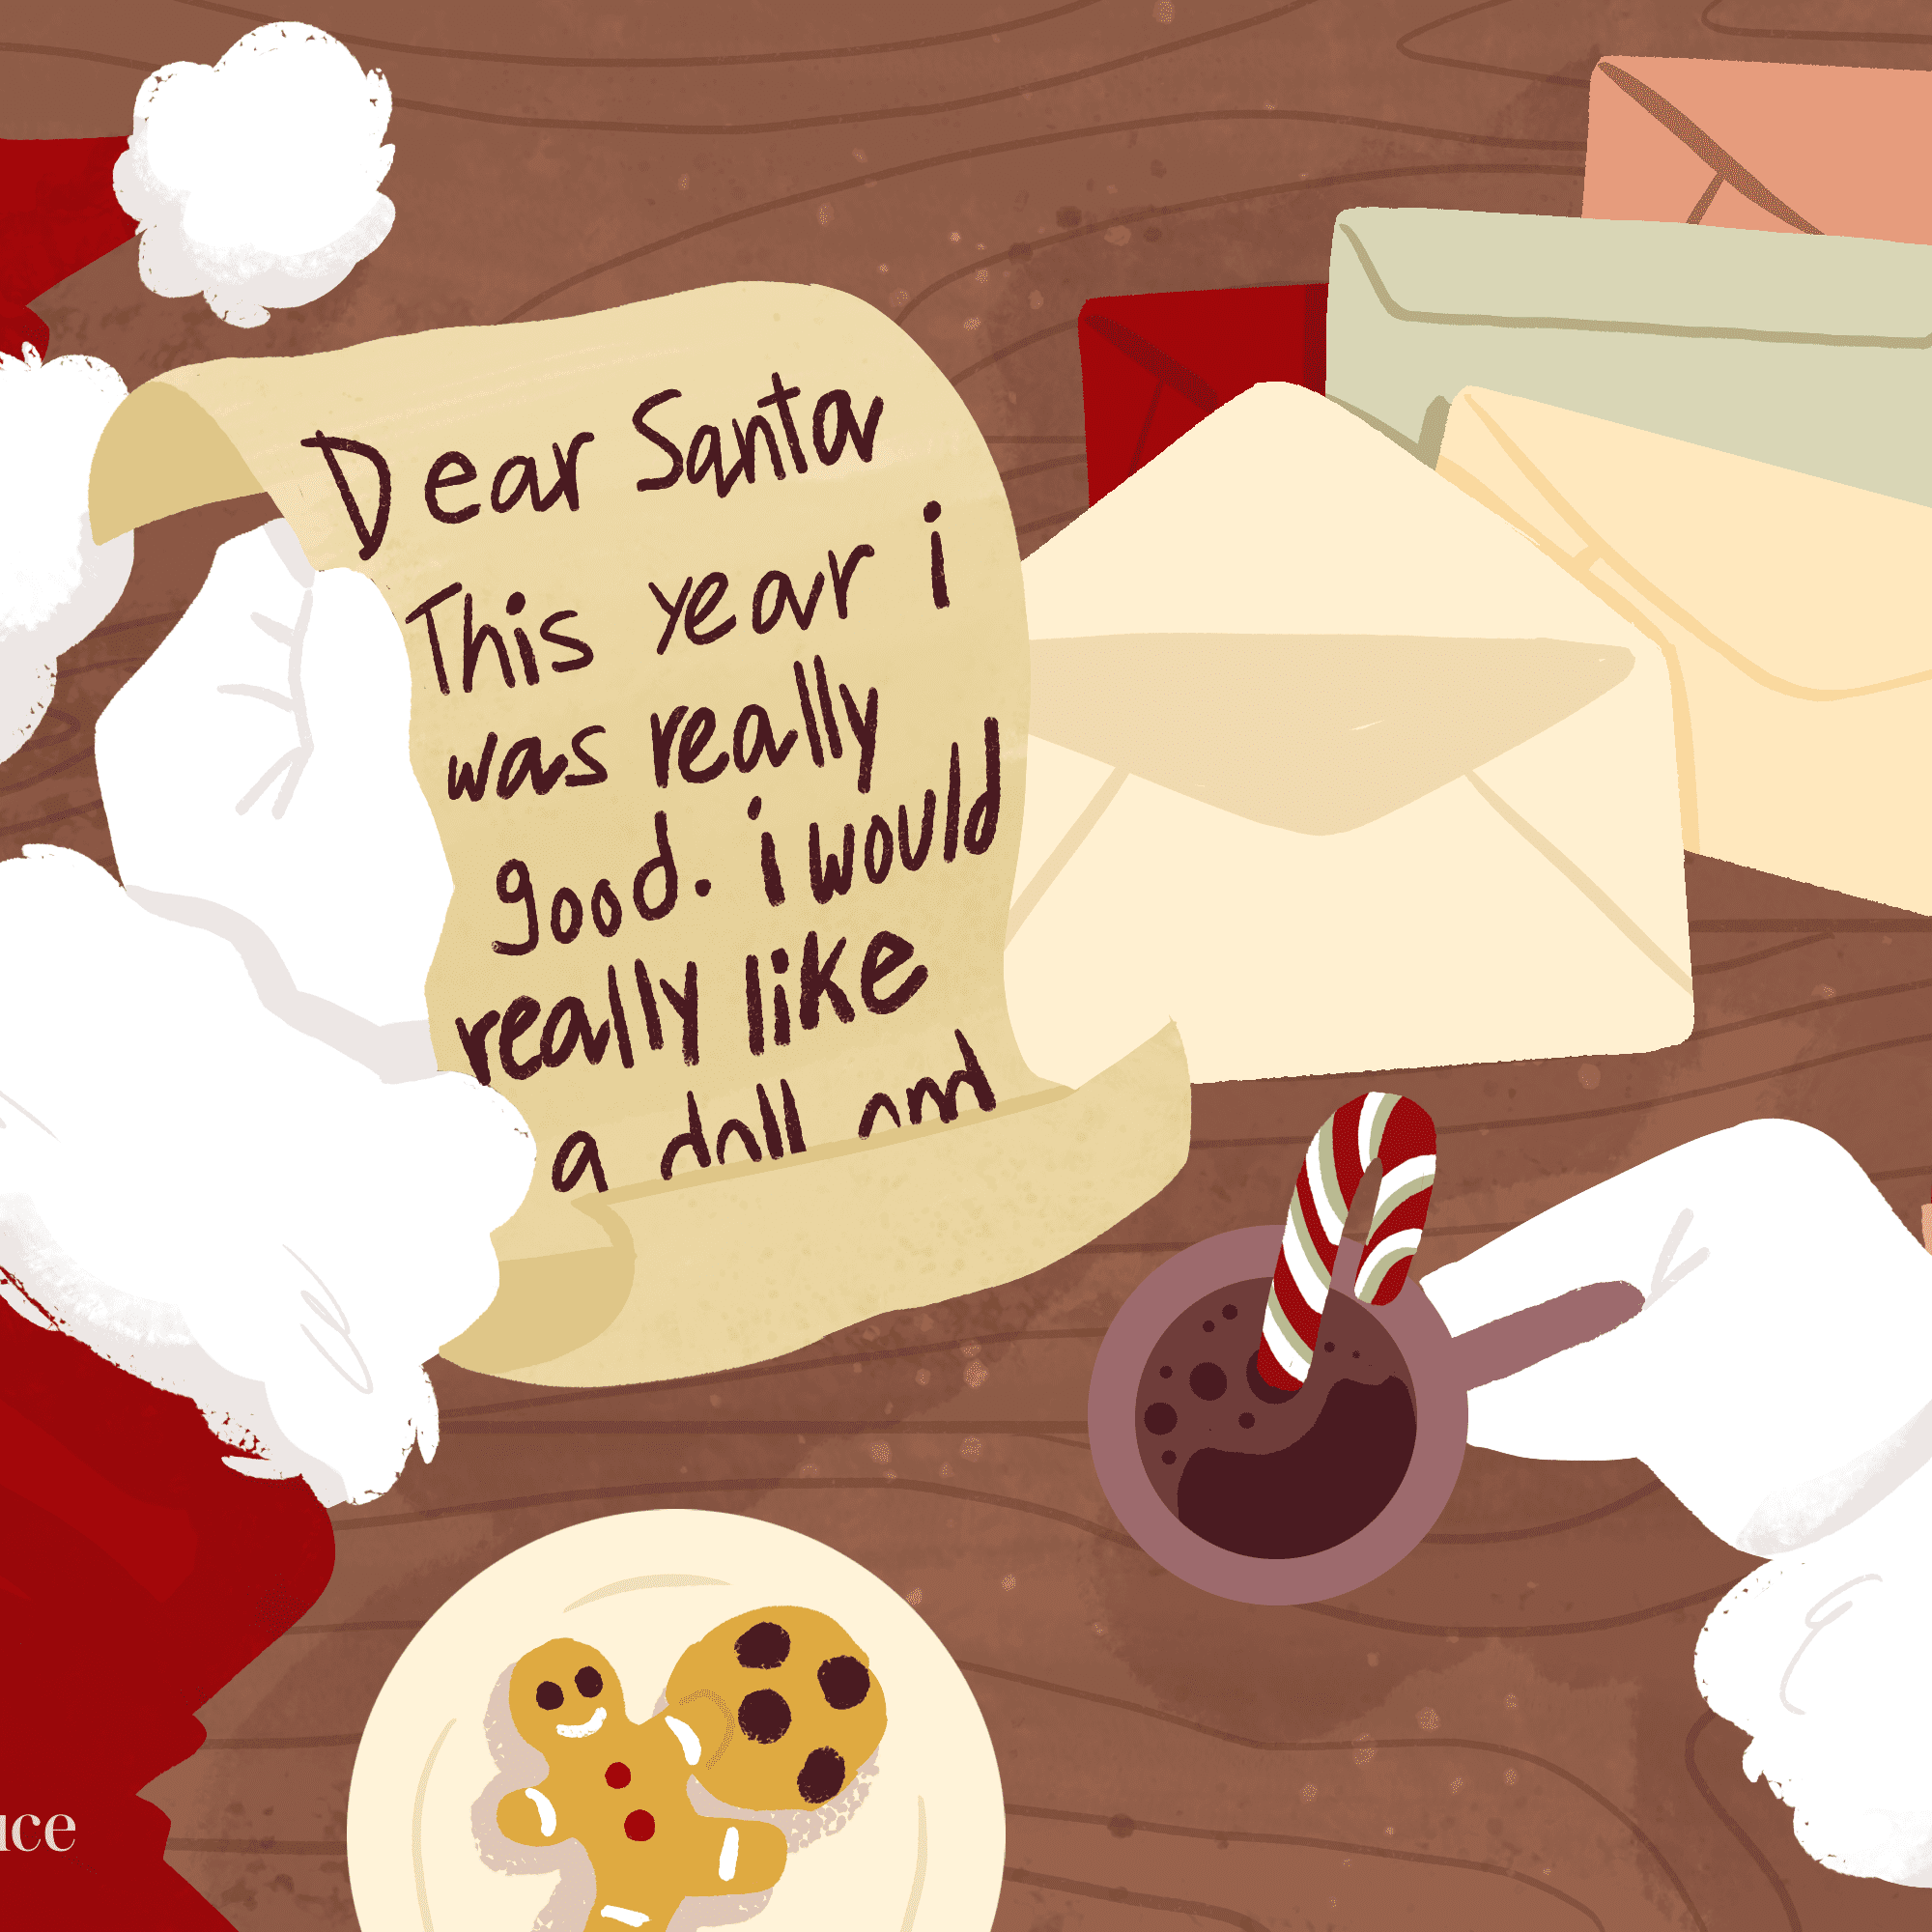 Perfect Christmas Present for Your Children- A Letter from Santa!